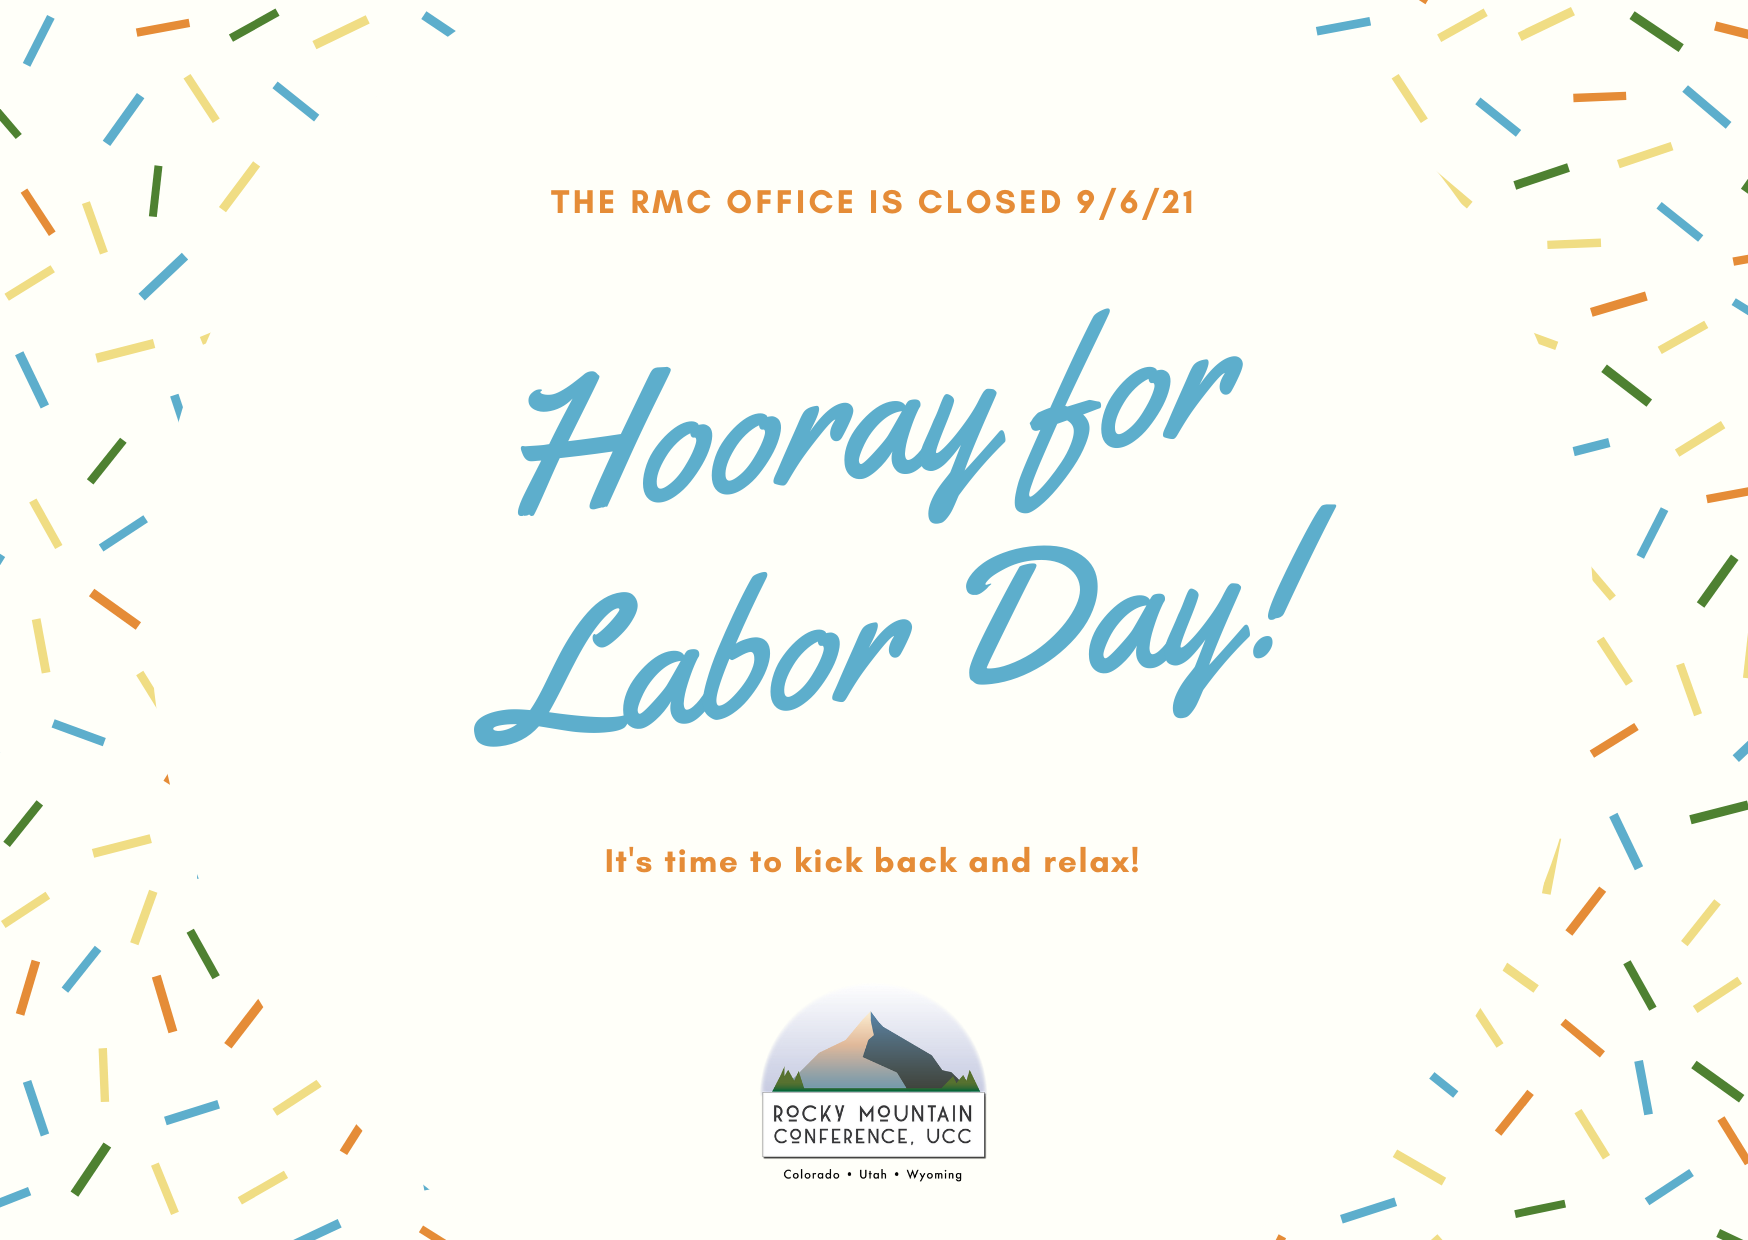 RMC Office Closed for Labor Day